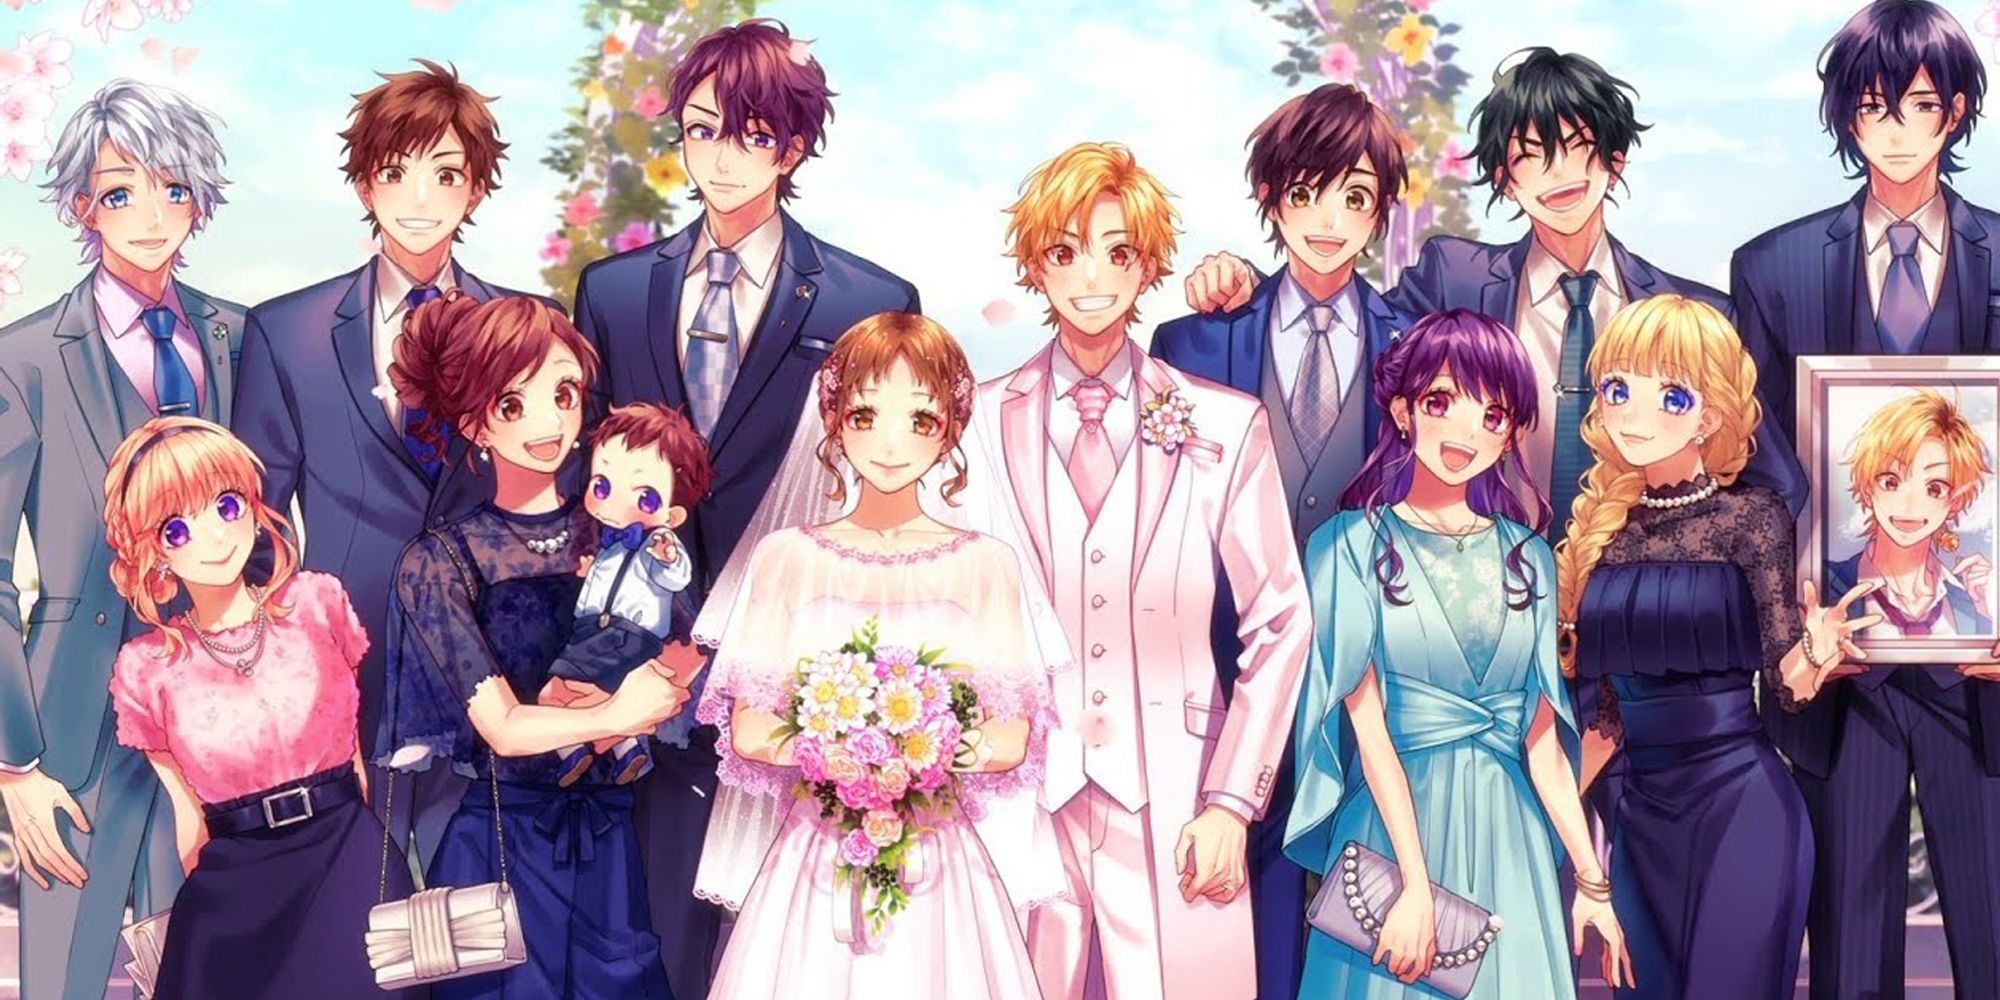 HoneyWorks Series || 5 Reasons to Read and/or Watch | Romance Anime Amino